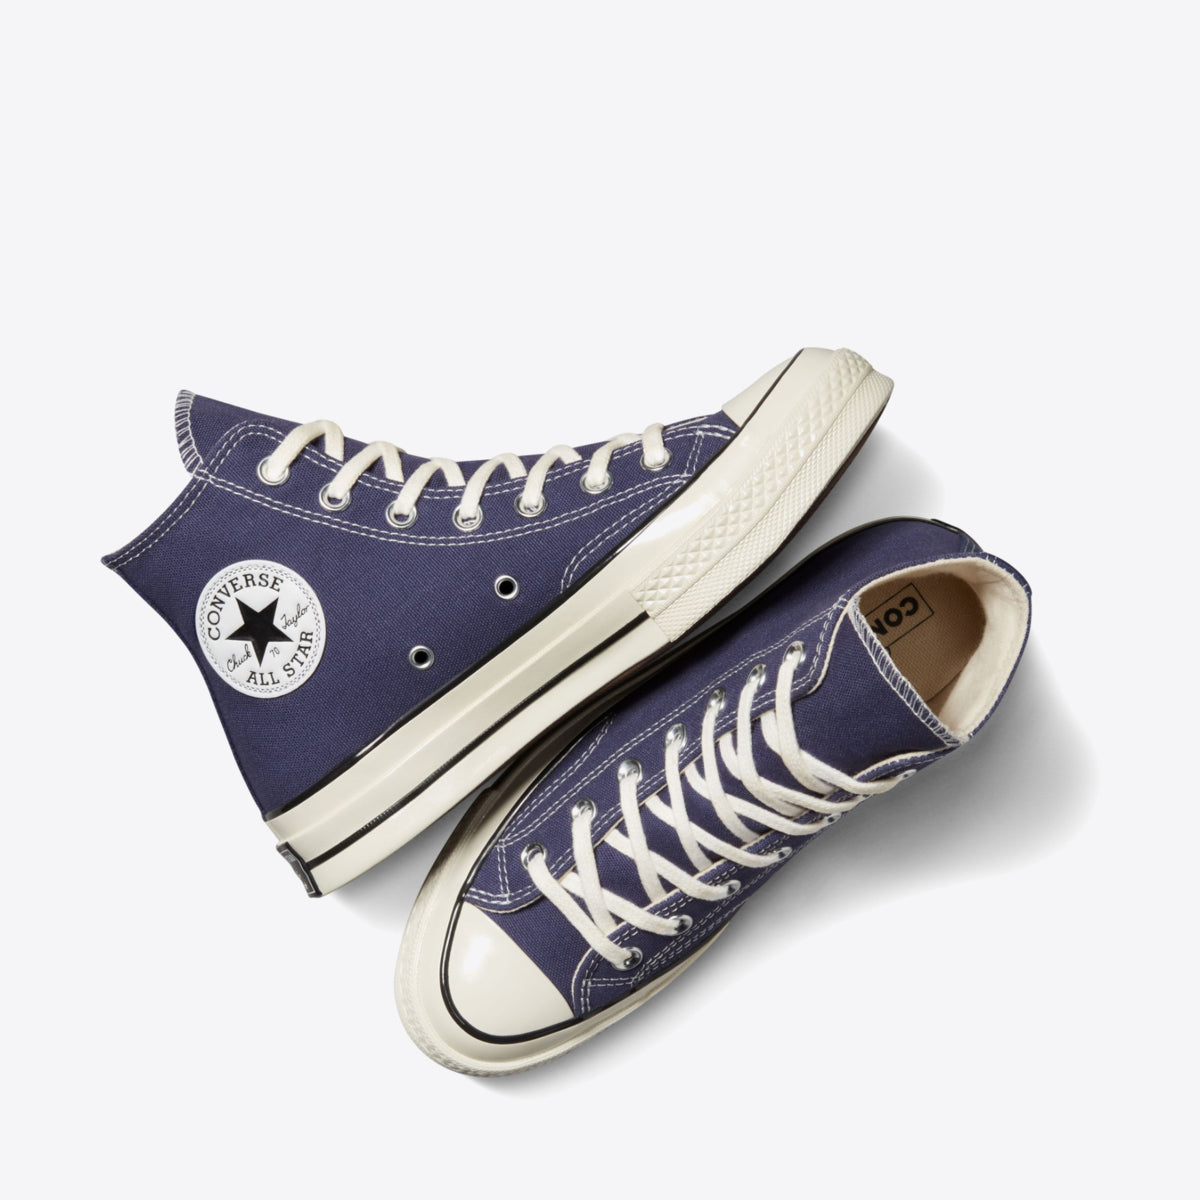 CONVERSE Chuck Taylor 70 Seasonal High Uncharted Waters/Egret - Image 4